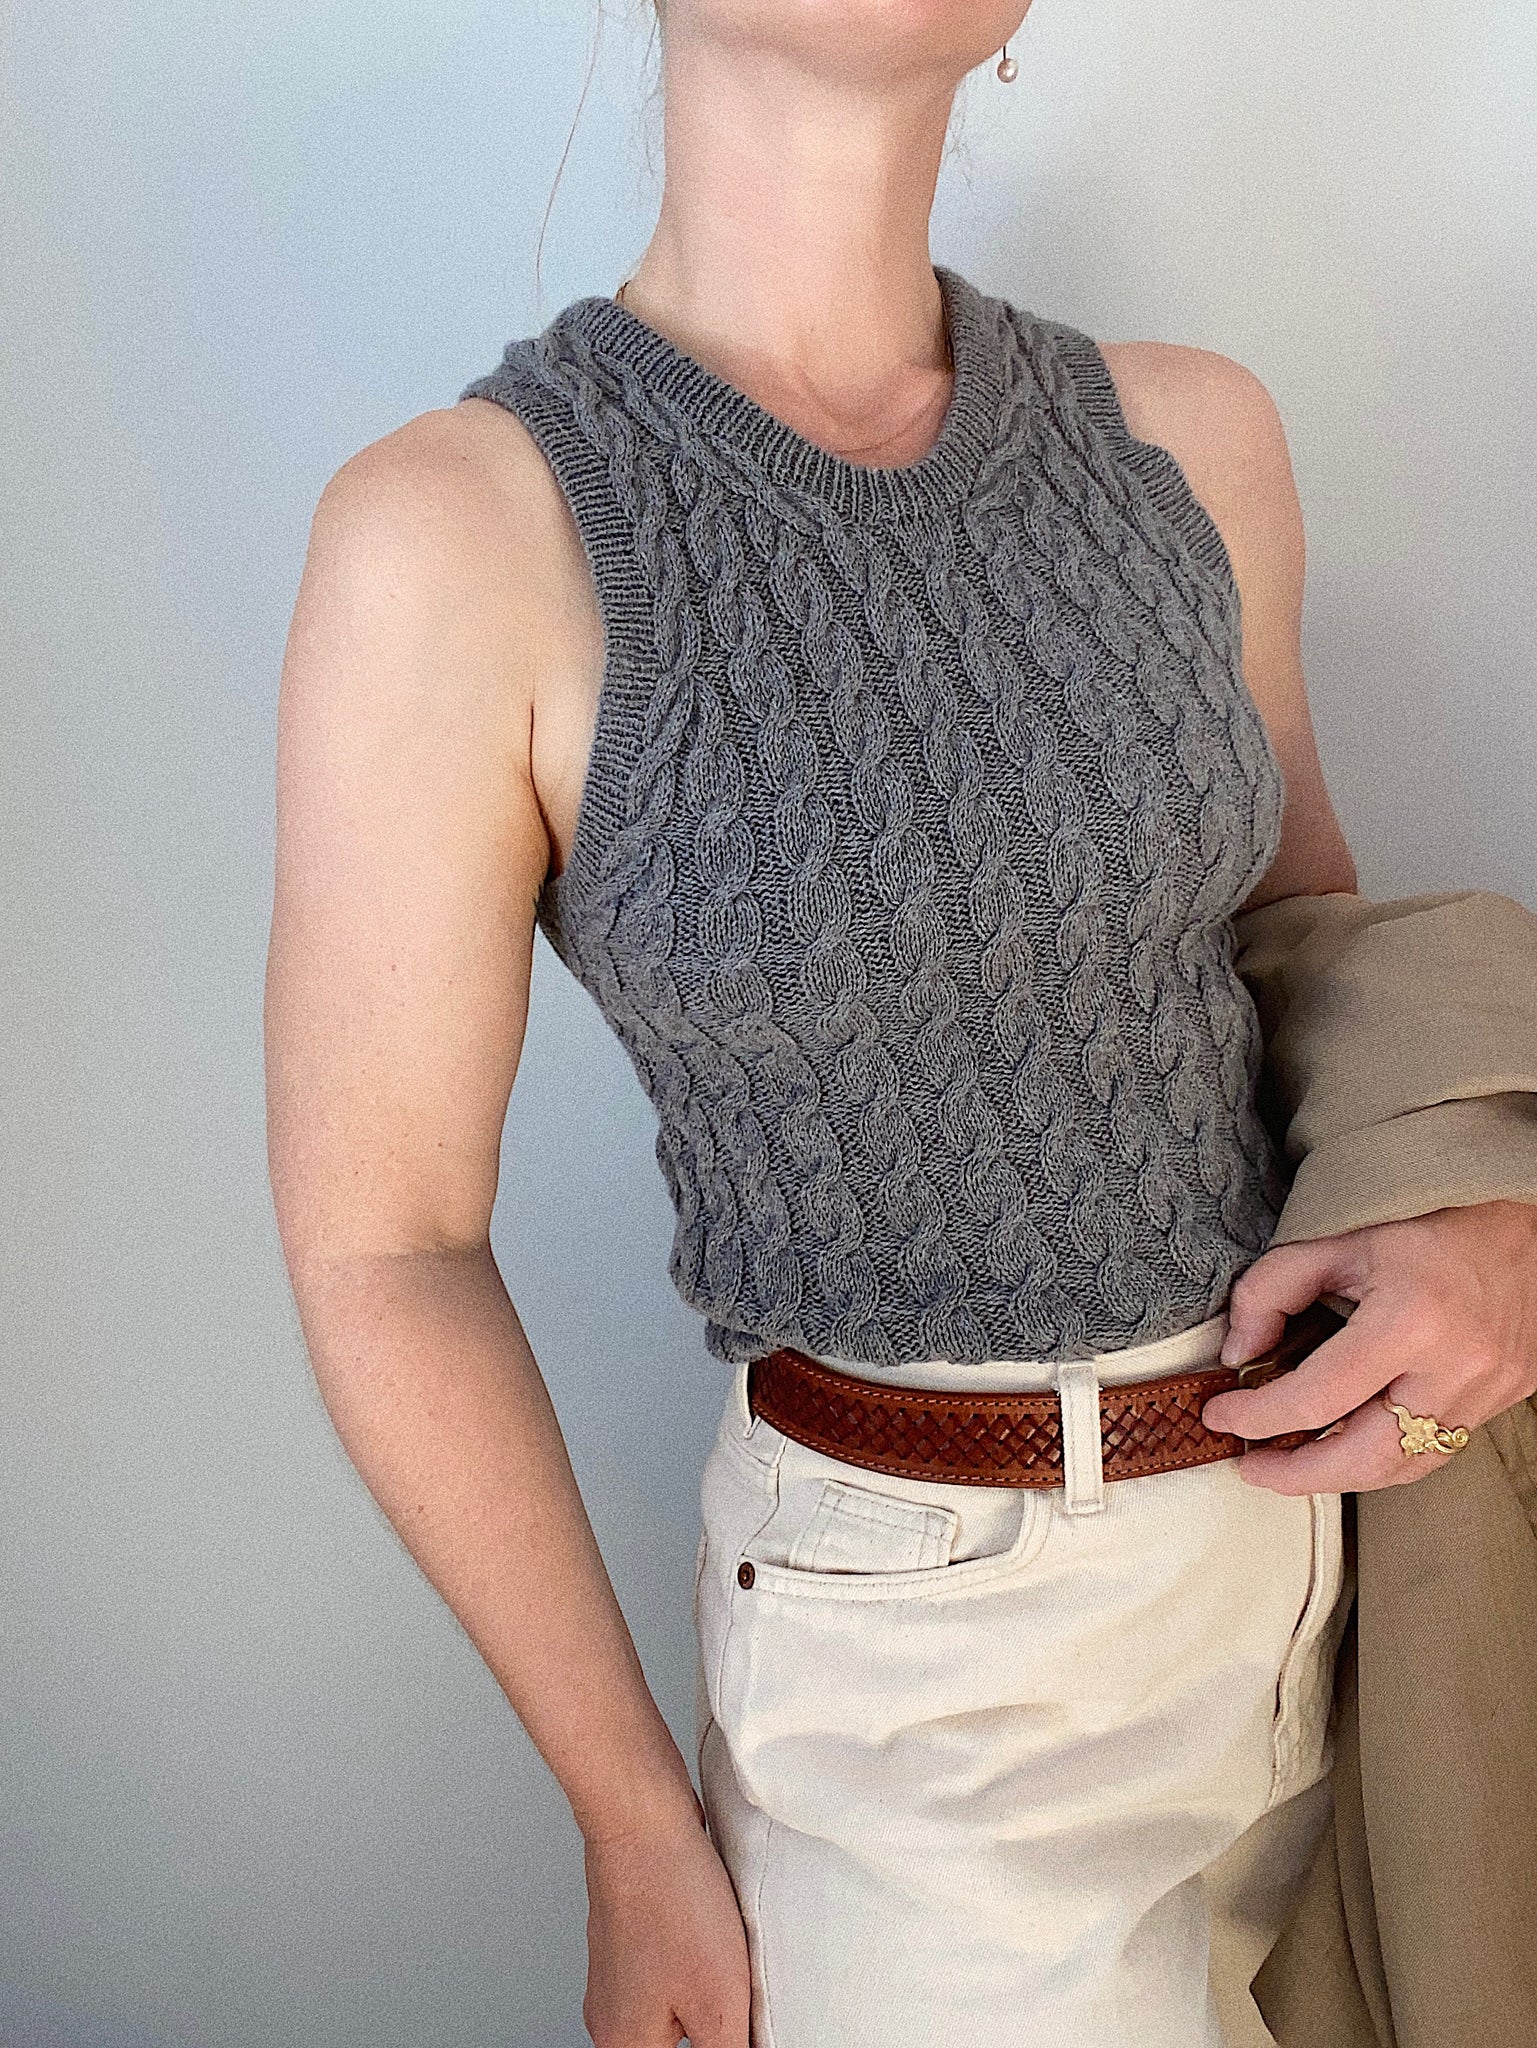 Camisole No. 8 - Knitting Pattern in English – • MY FAVOURITE THINGS •  KNITWEAR